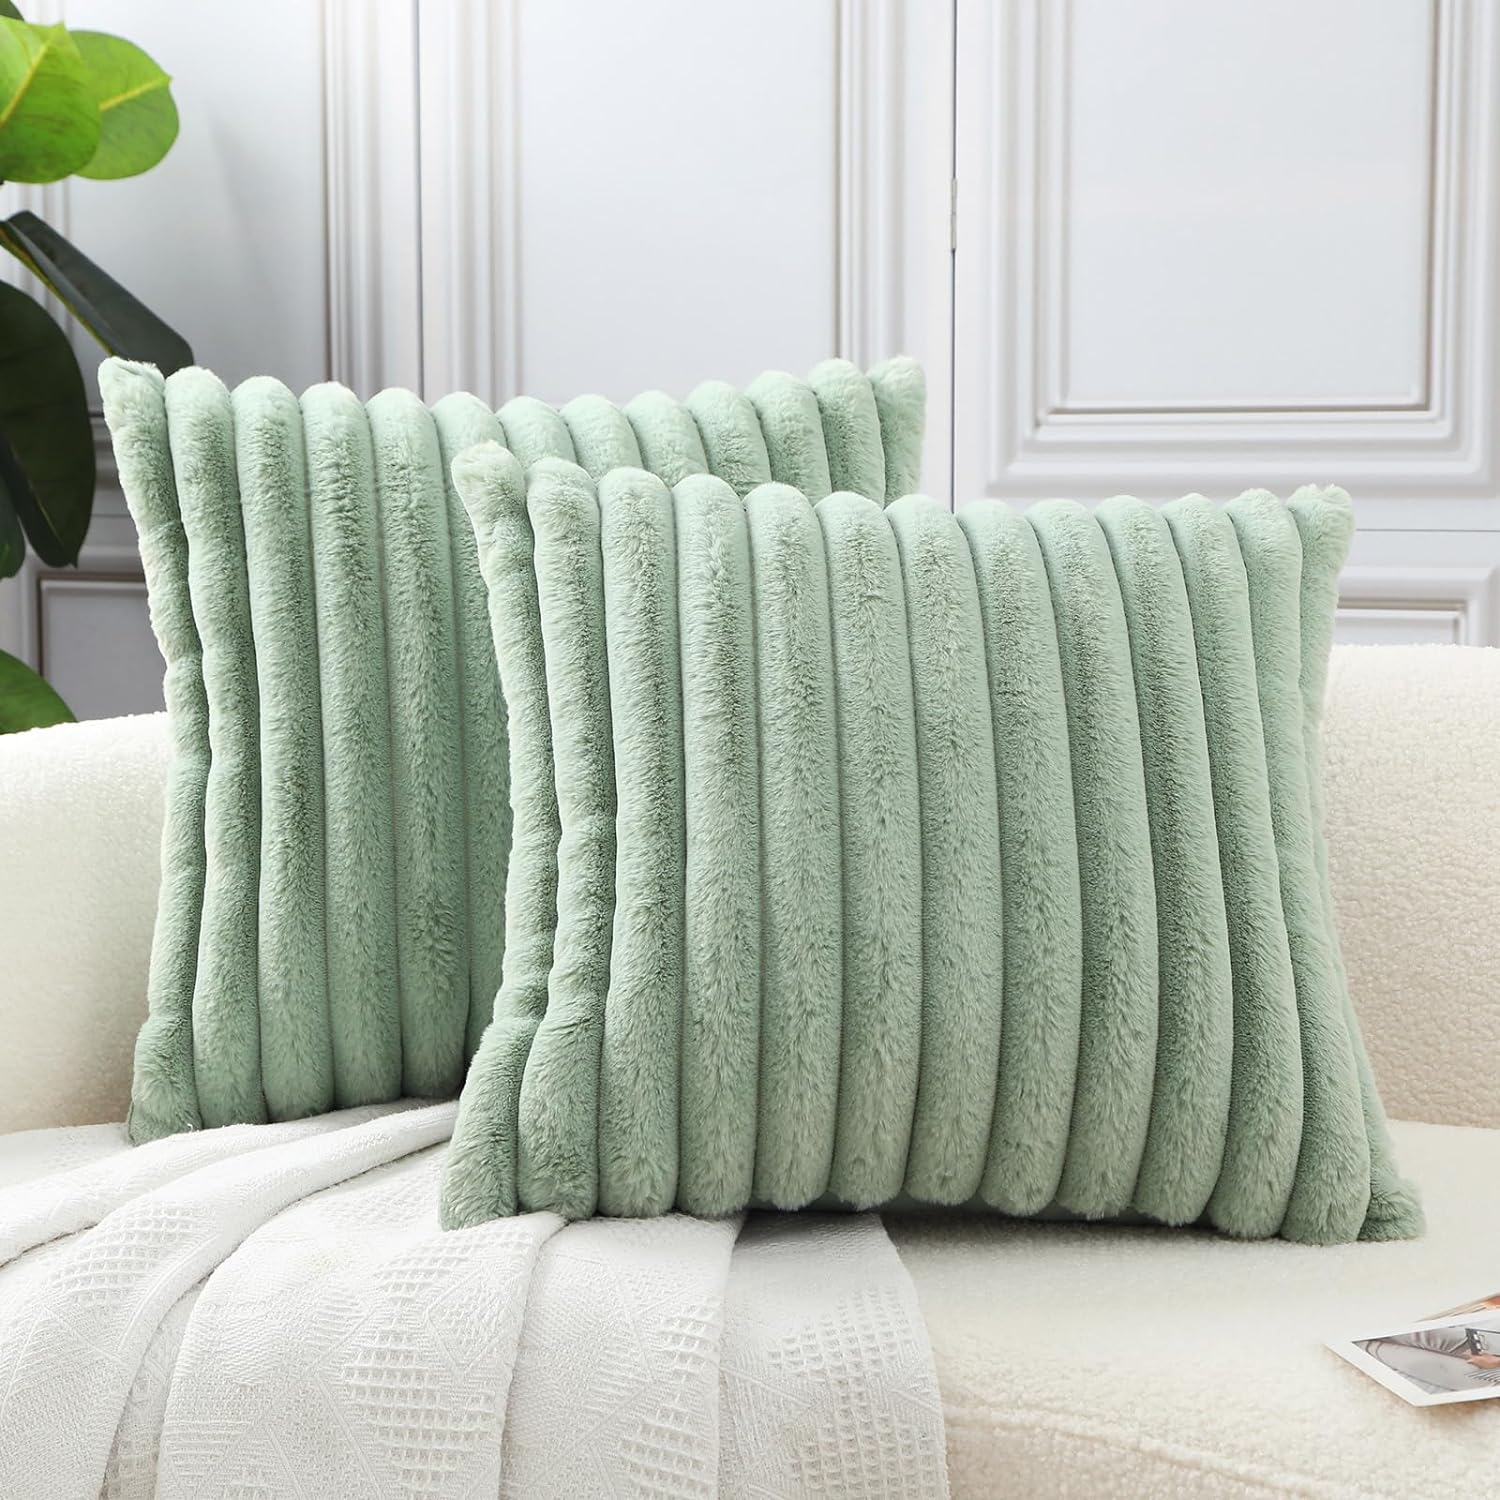 HPUK Faux Fur Plush Striped Throw Pillow Covers 18x18 Inch, Decorative Fluffy Couch Pillow Covers for Living Room, Accent Cozy and Fuzzy Pillow Covers for Couch, Sofa, and Bedroom(Sage Green)